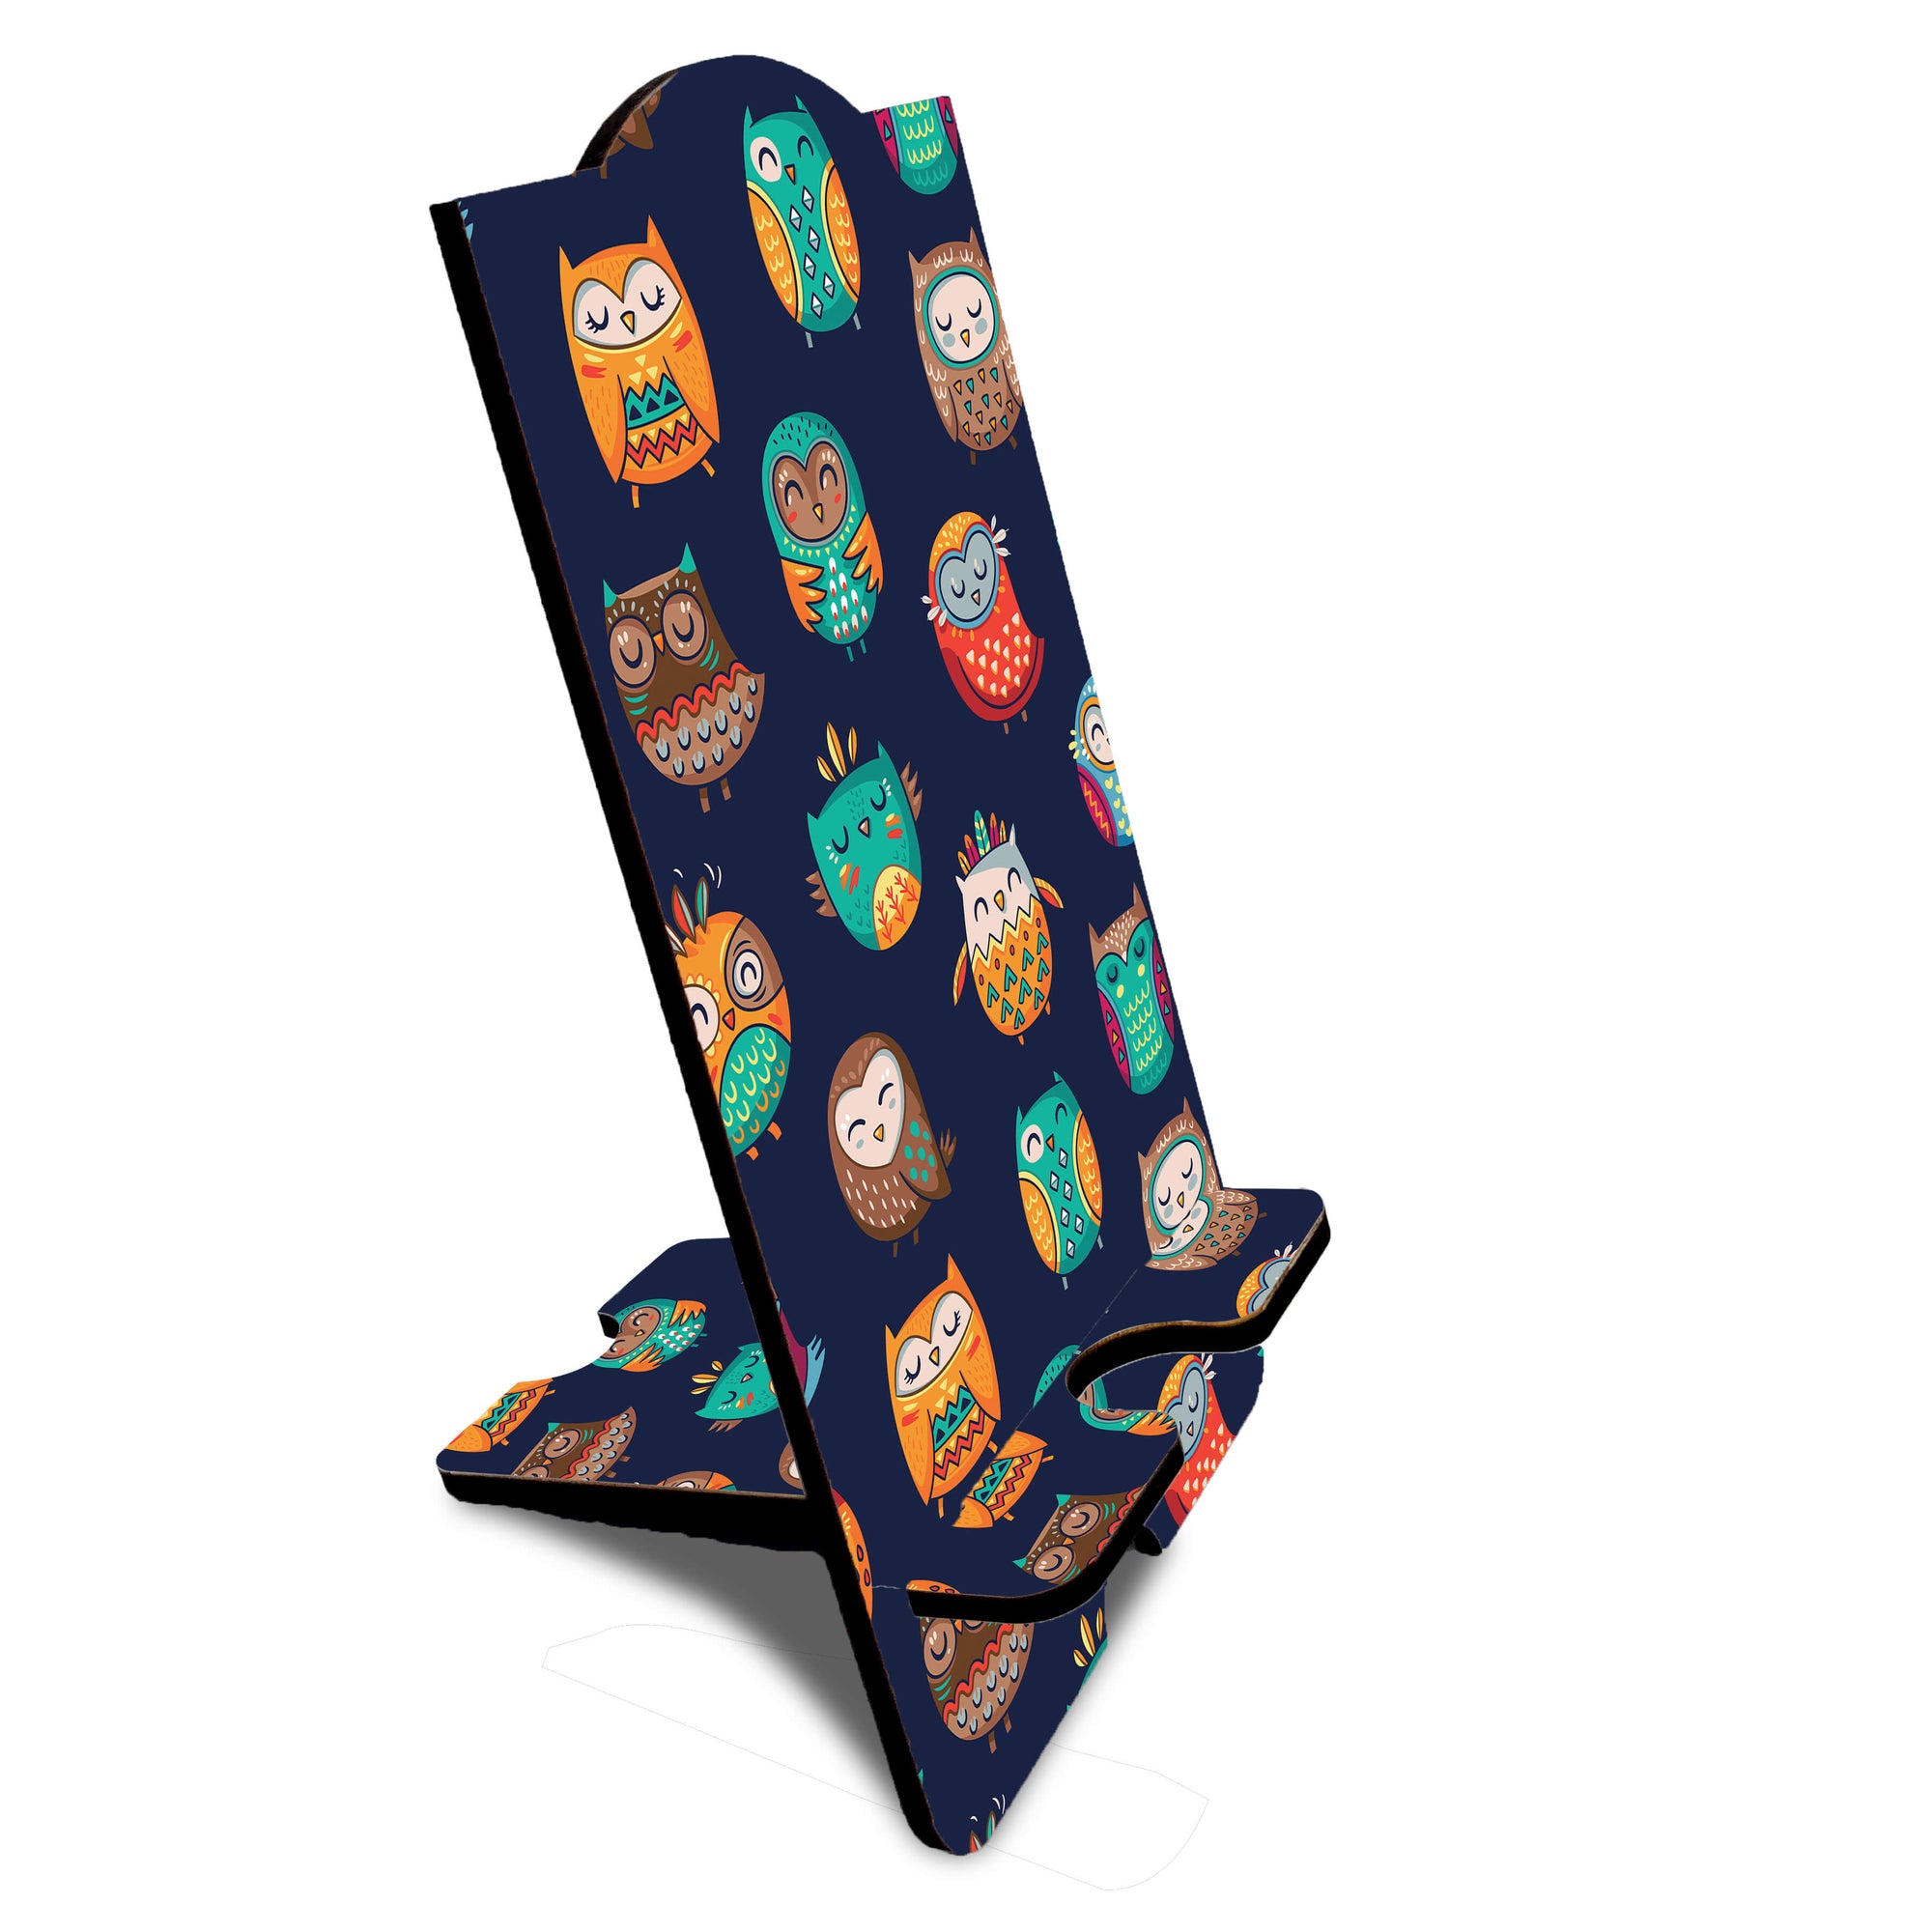 Owly Pattern Mobile Stand